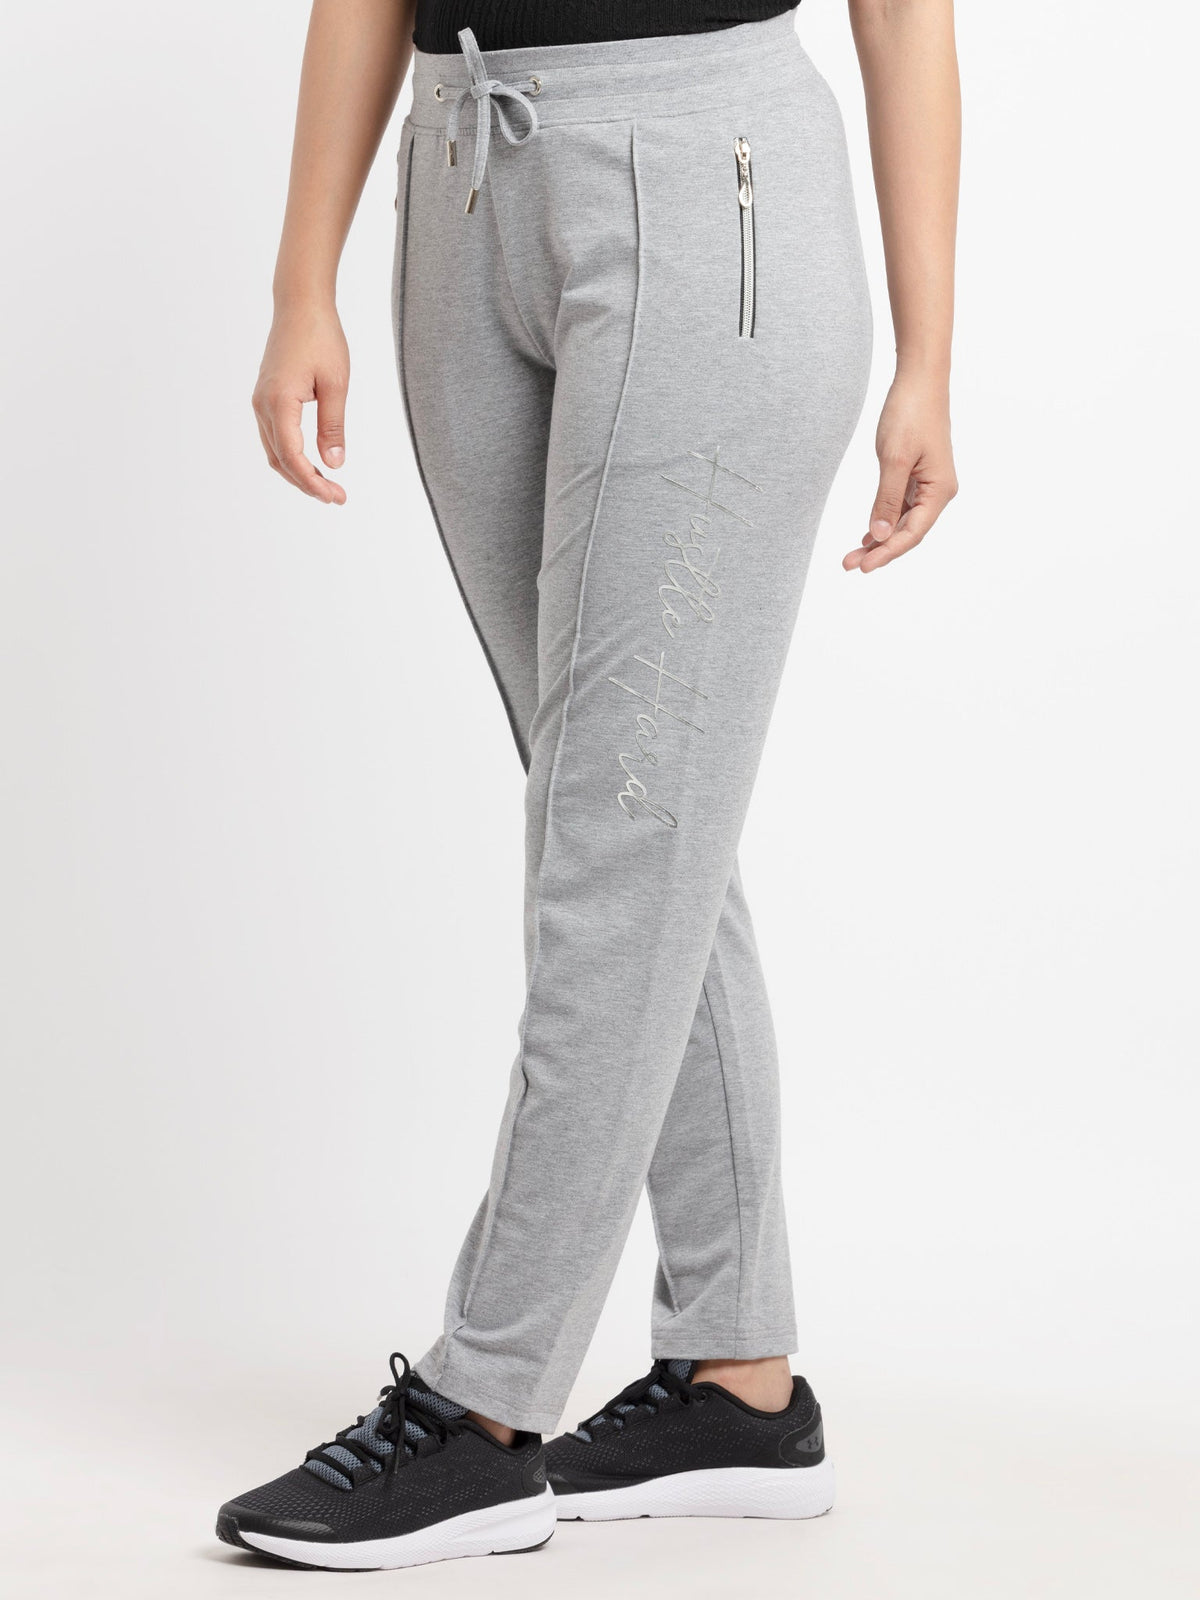 Women's Ankle length Printed Joggers